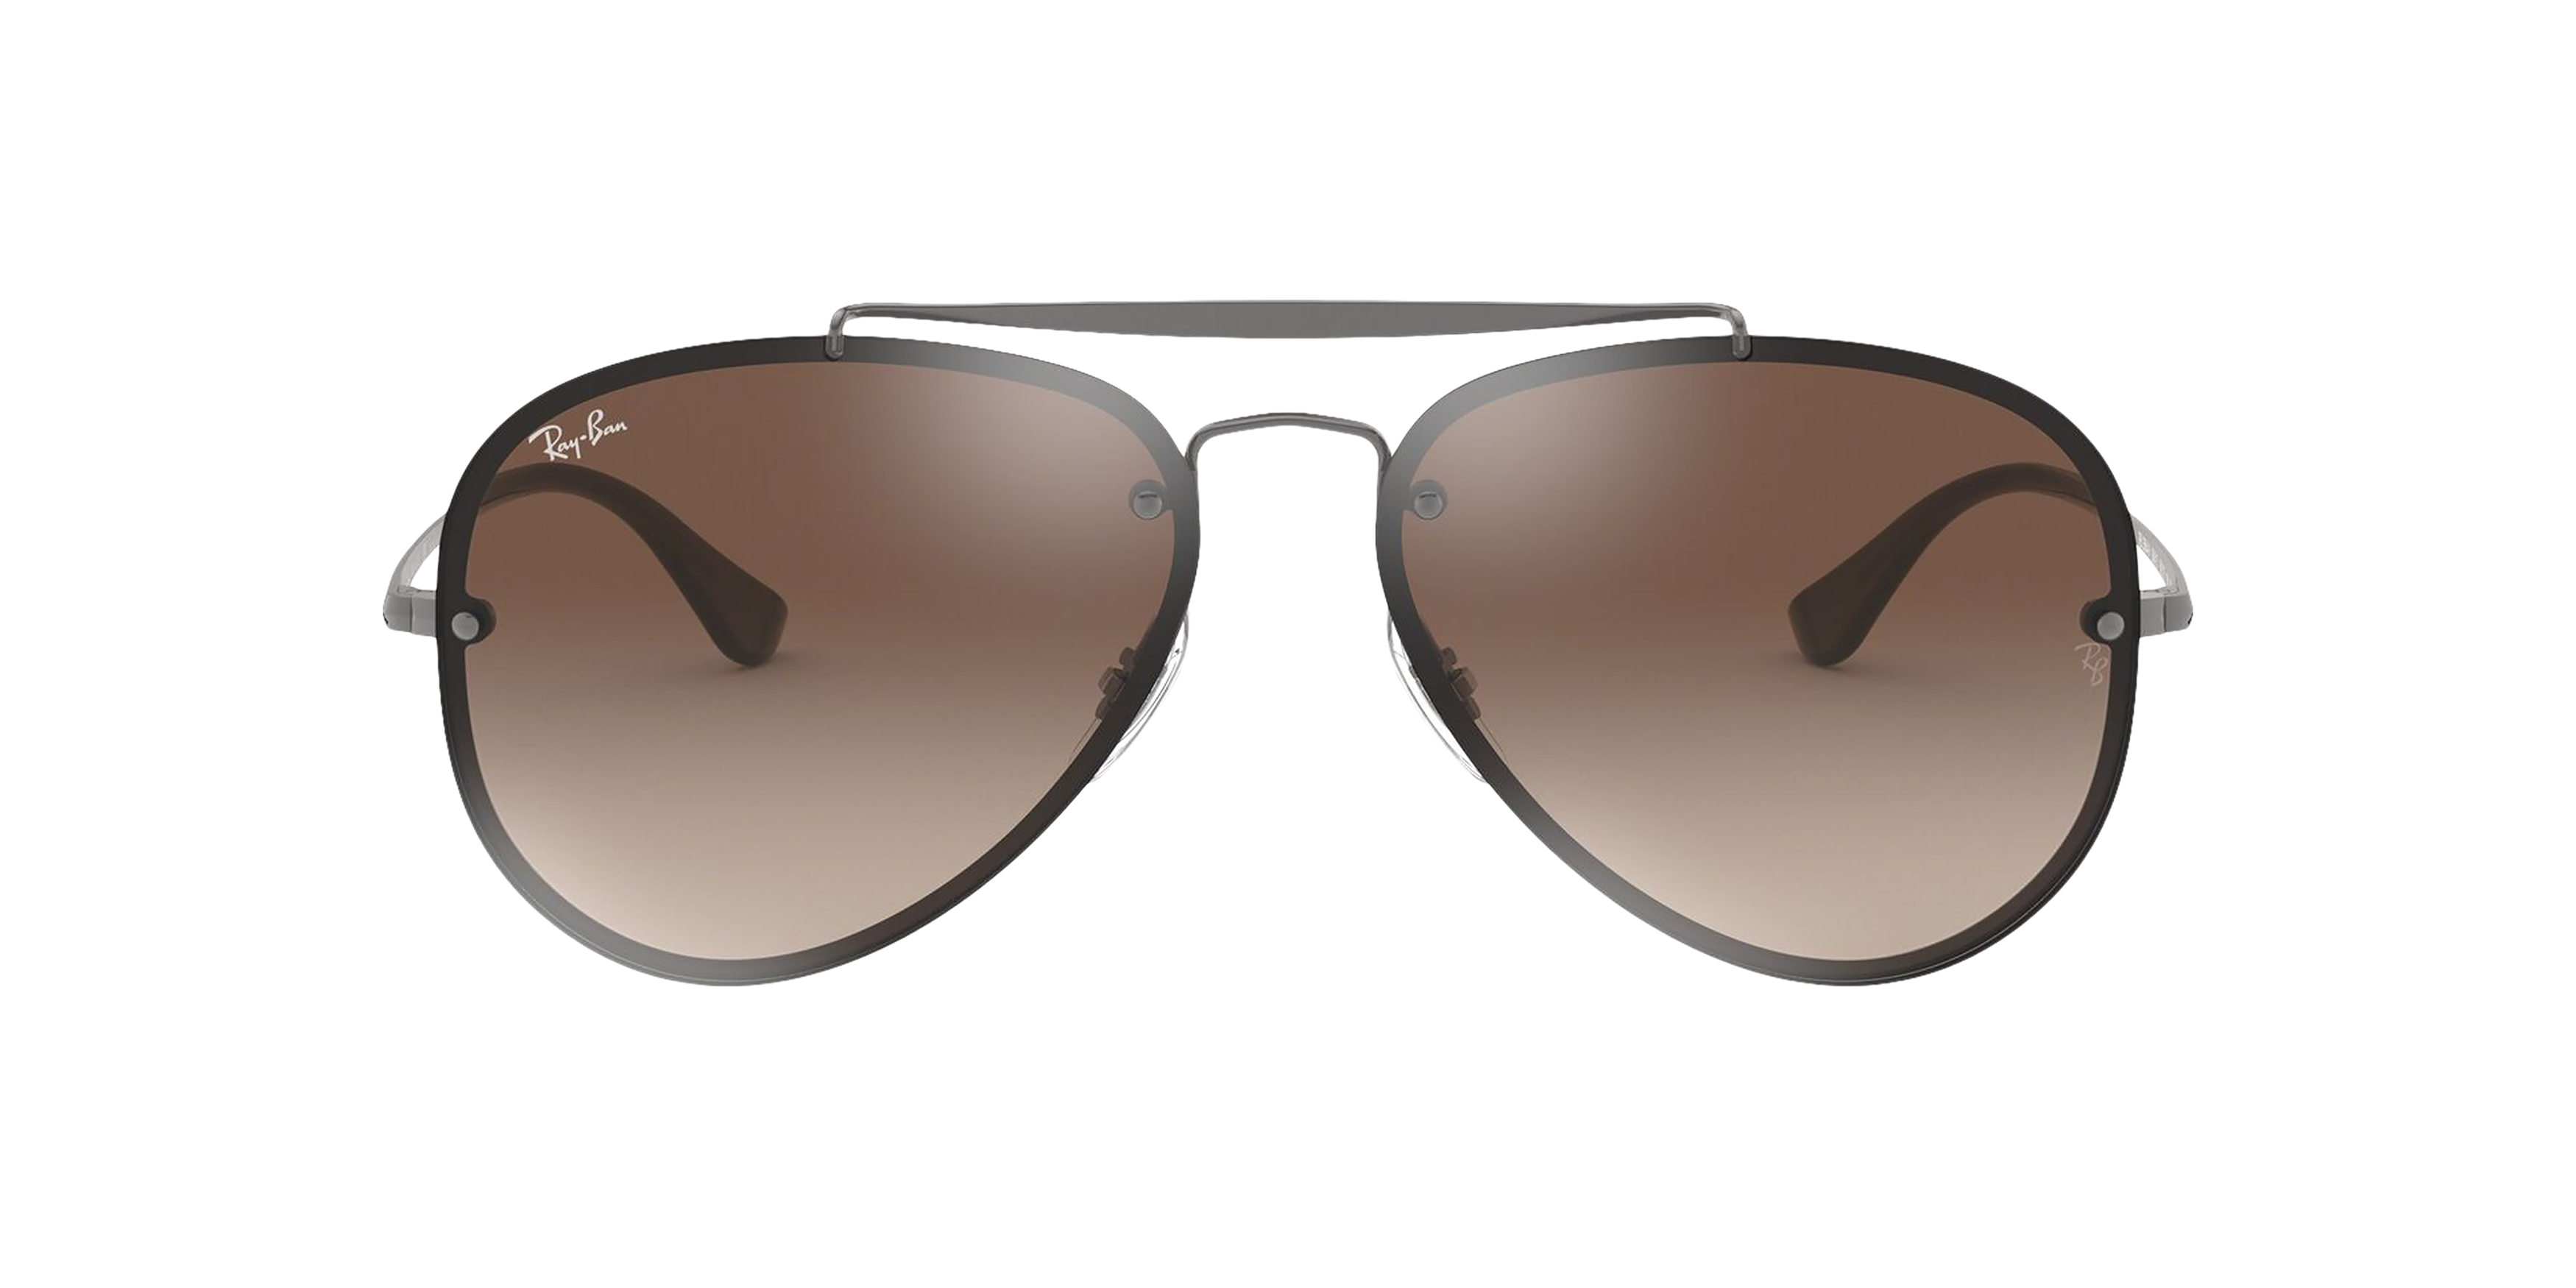 [products.image.front] Ray-Ban Blaze Aviator RB3584N 004/13